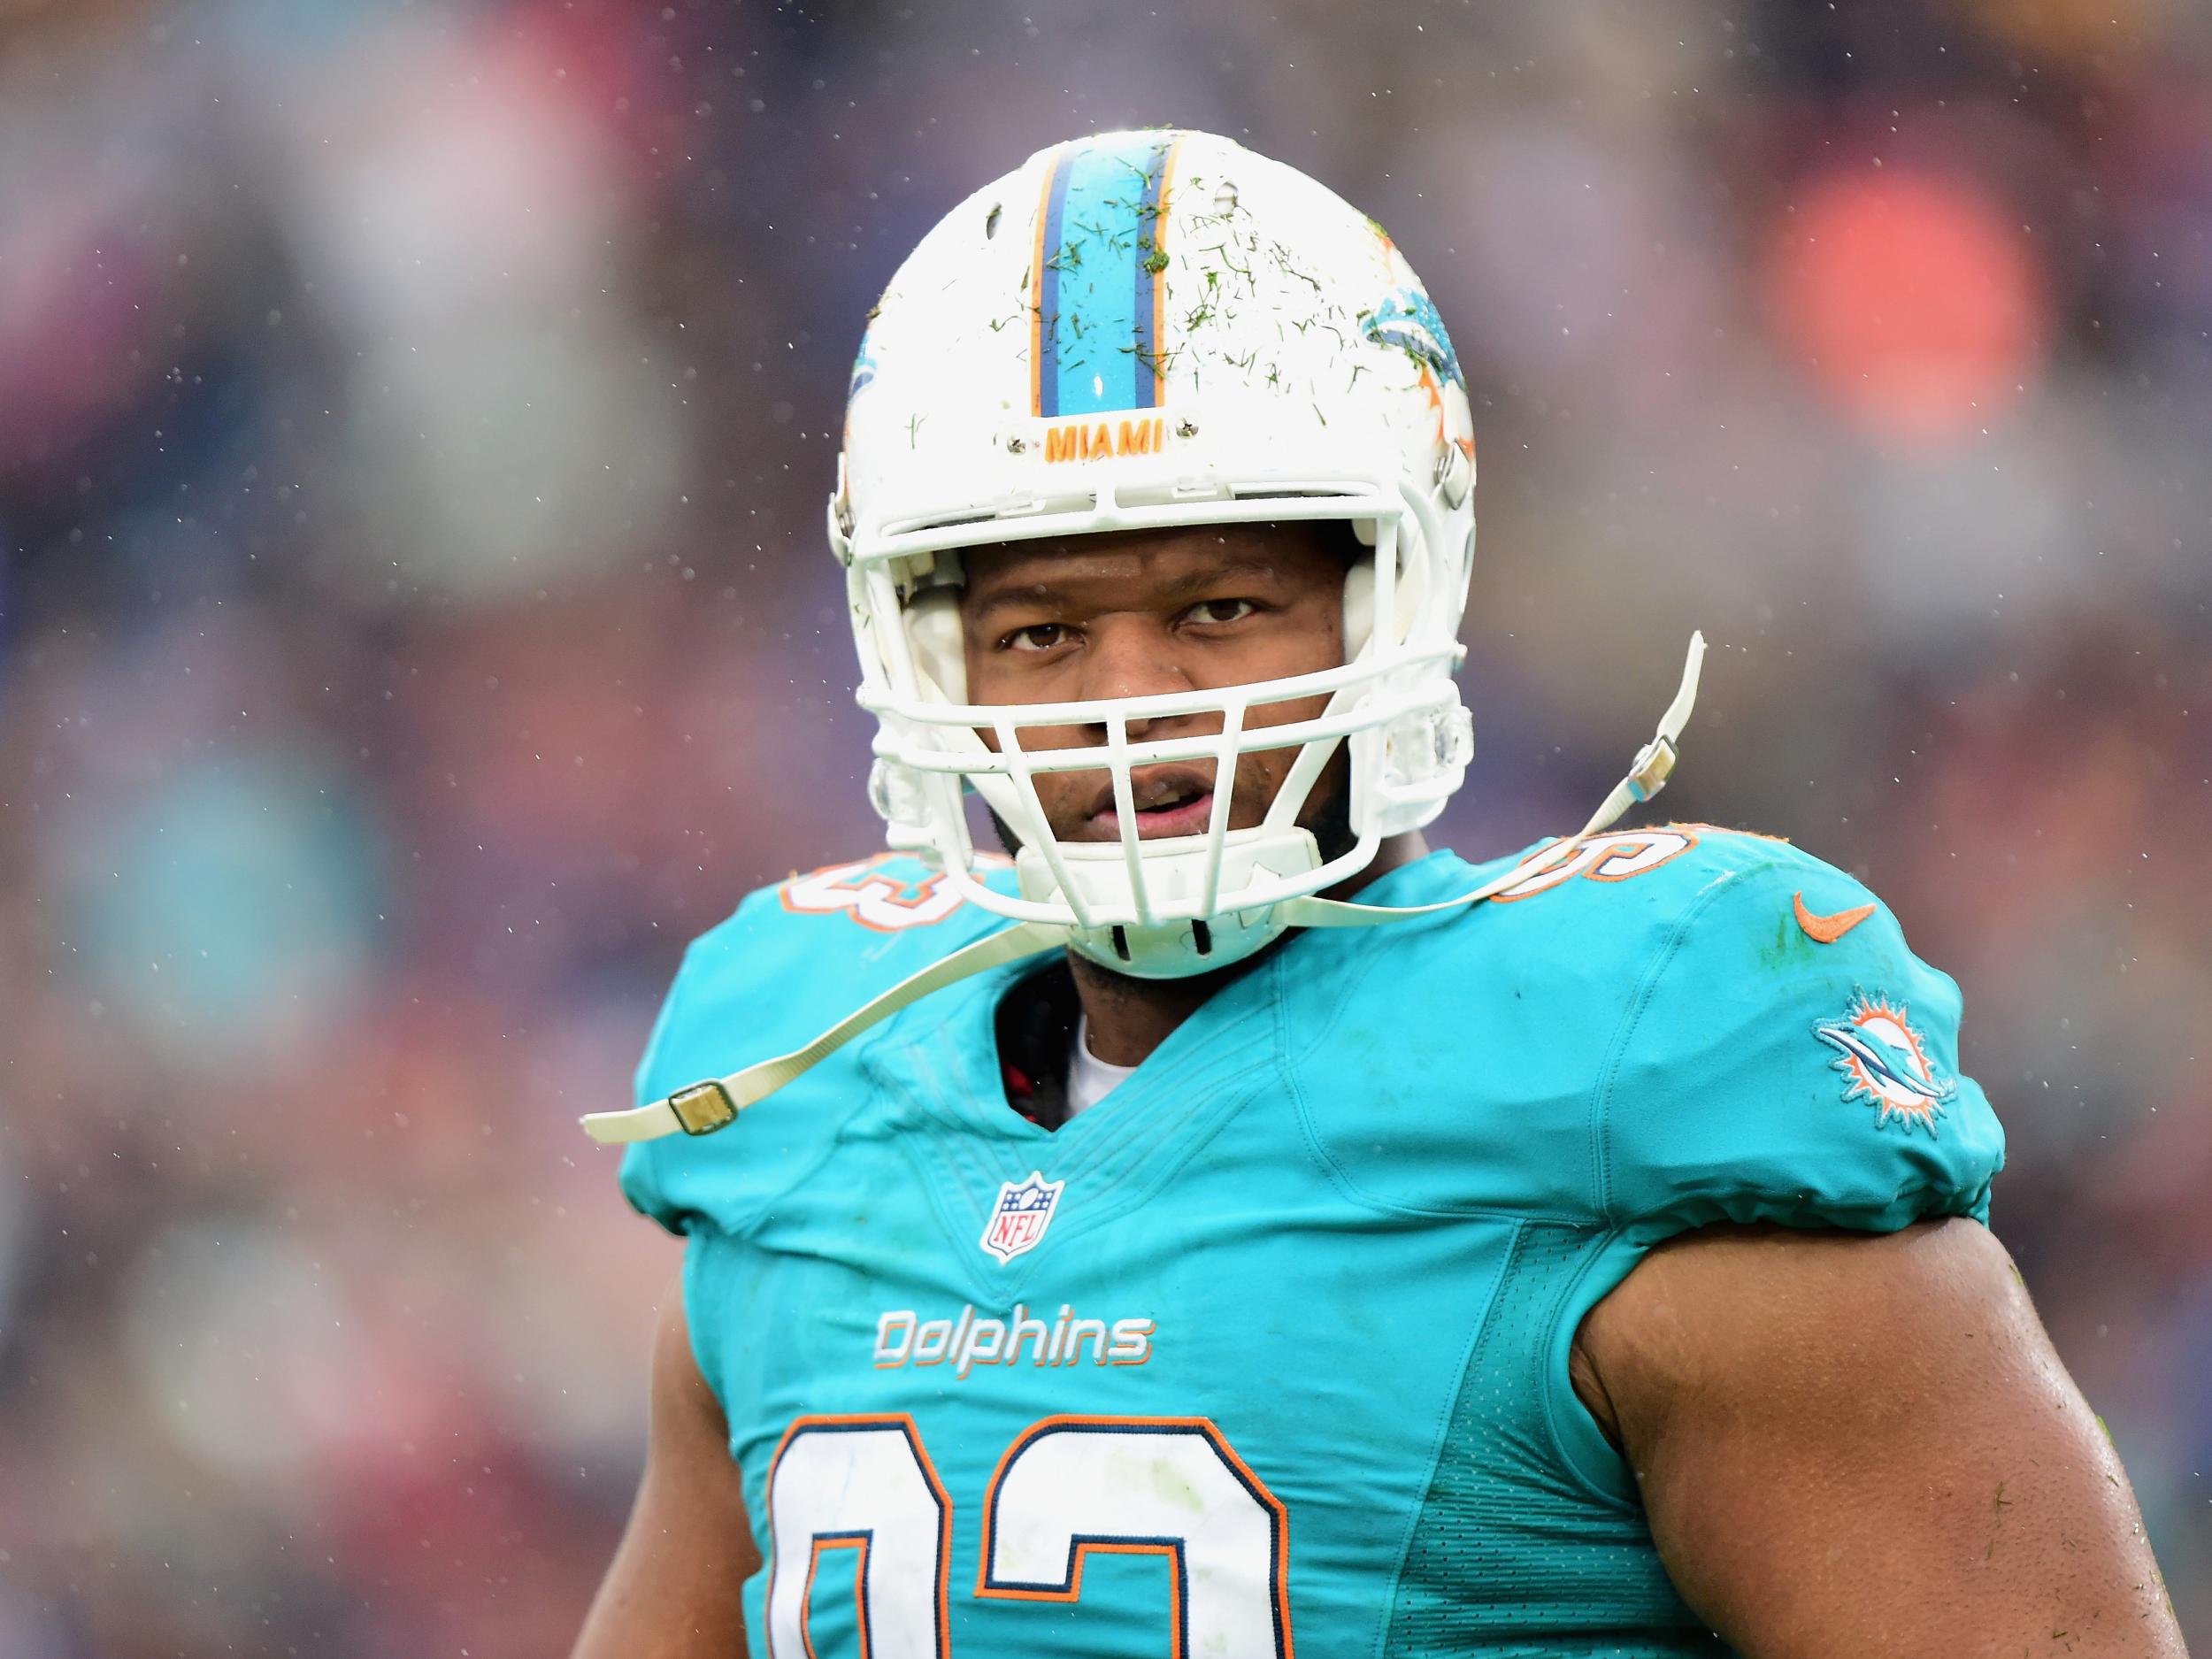 Ndamukong Suh believes the best way to stop Brady is to 'hit him repeatedly'